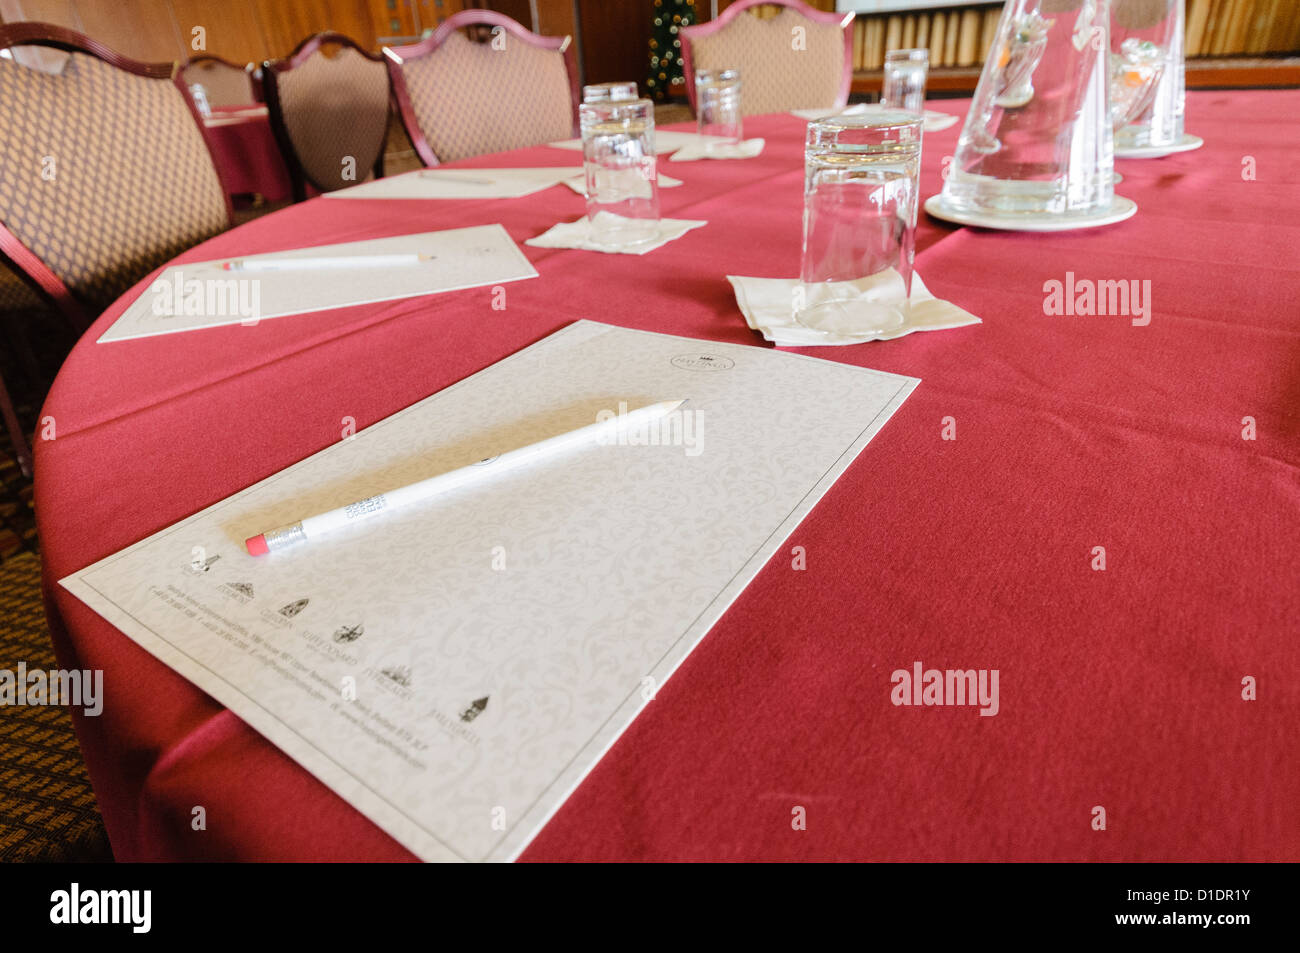 Paper and pencils left on the table in a hotel conference room. Stock Photo